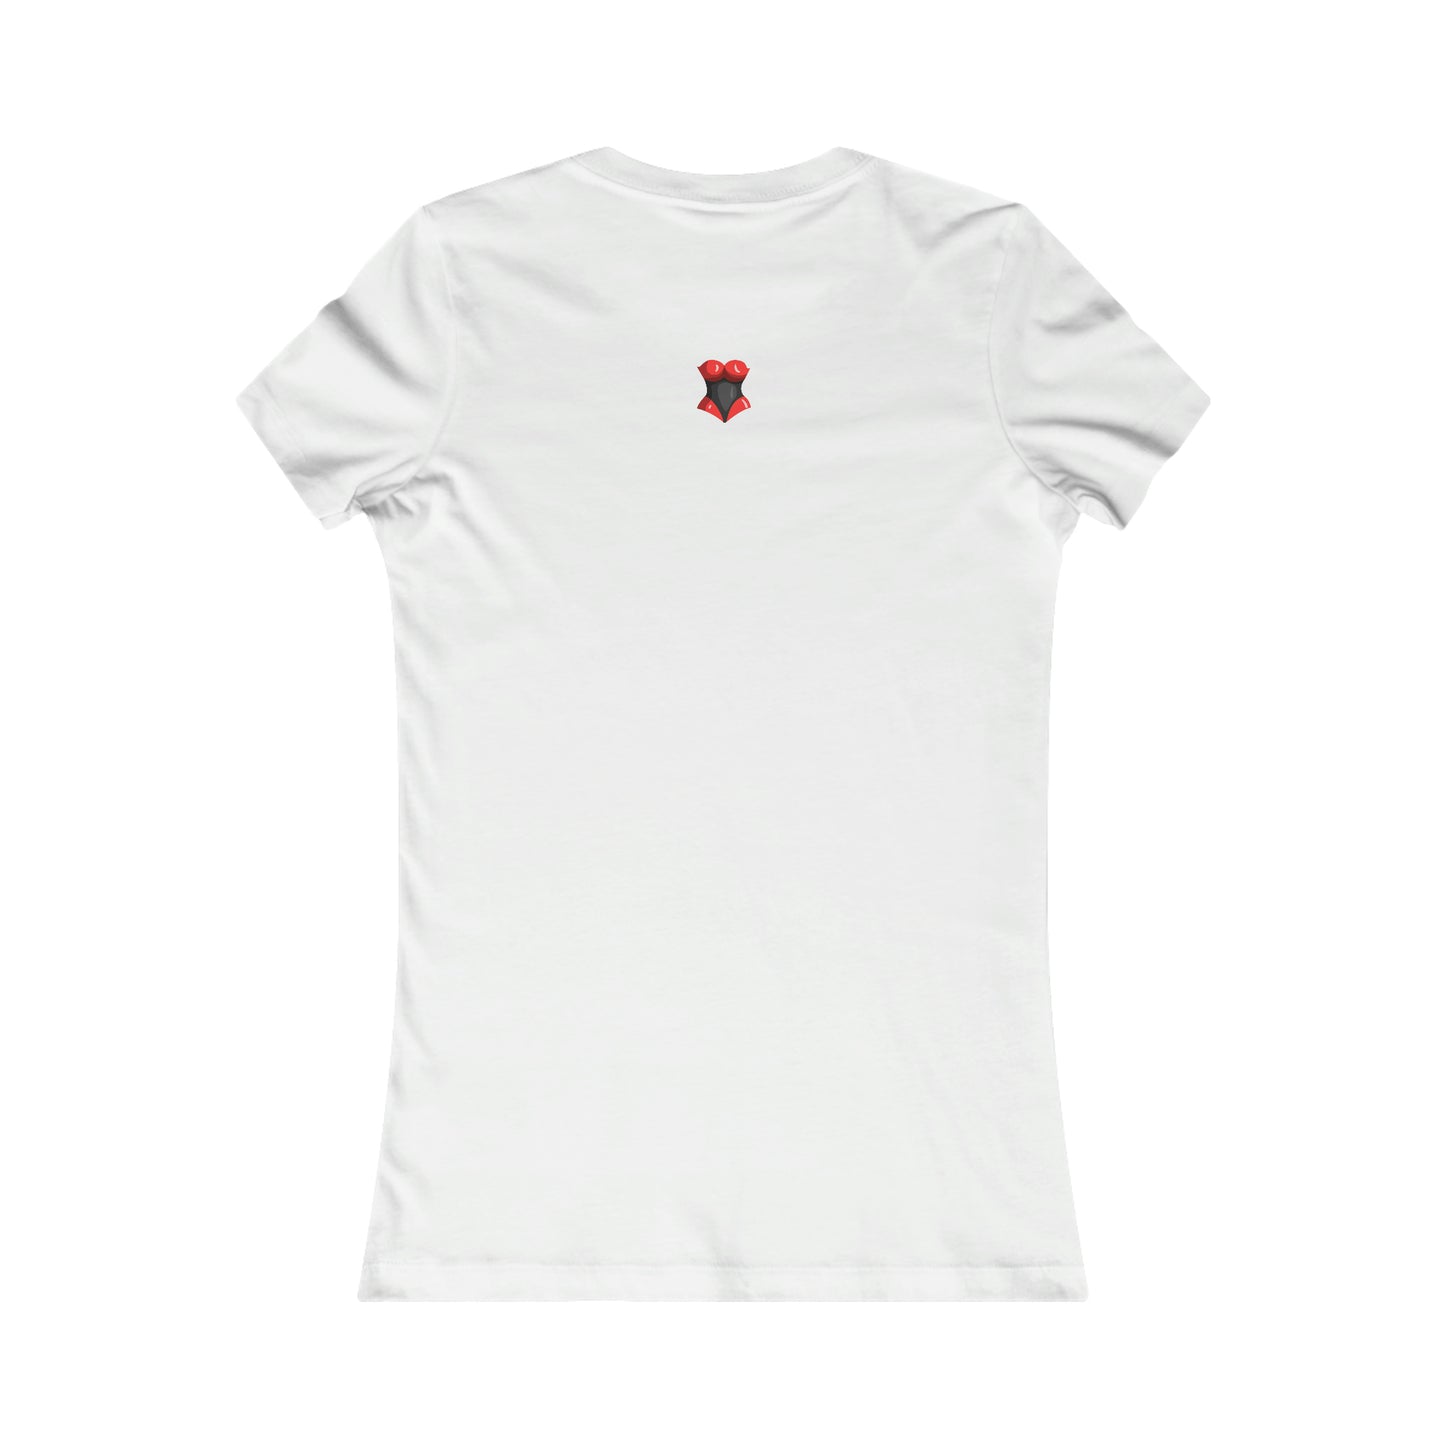 The submissive Smile | Fitted Tee